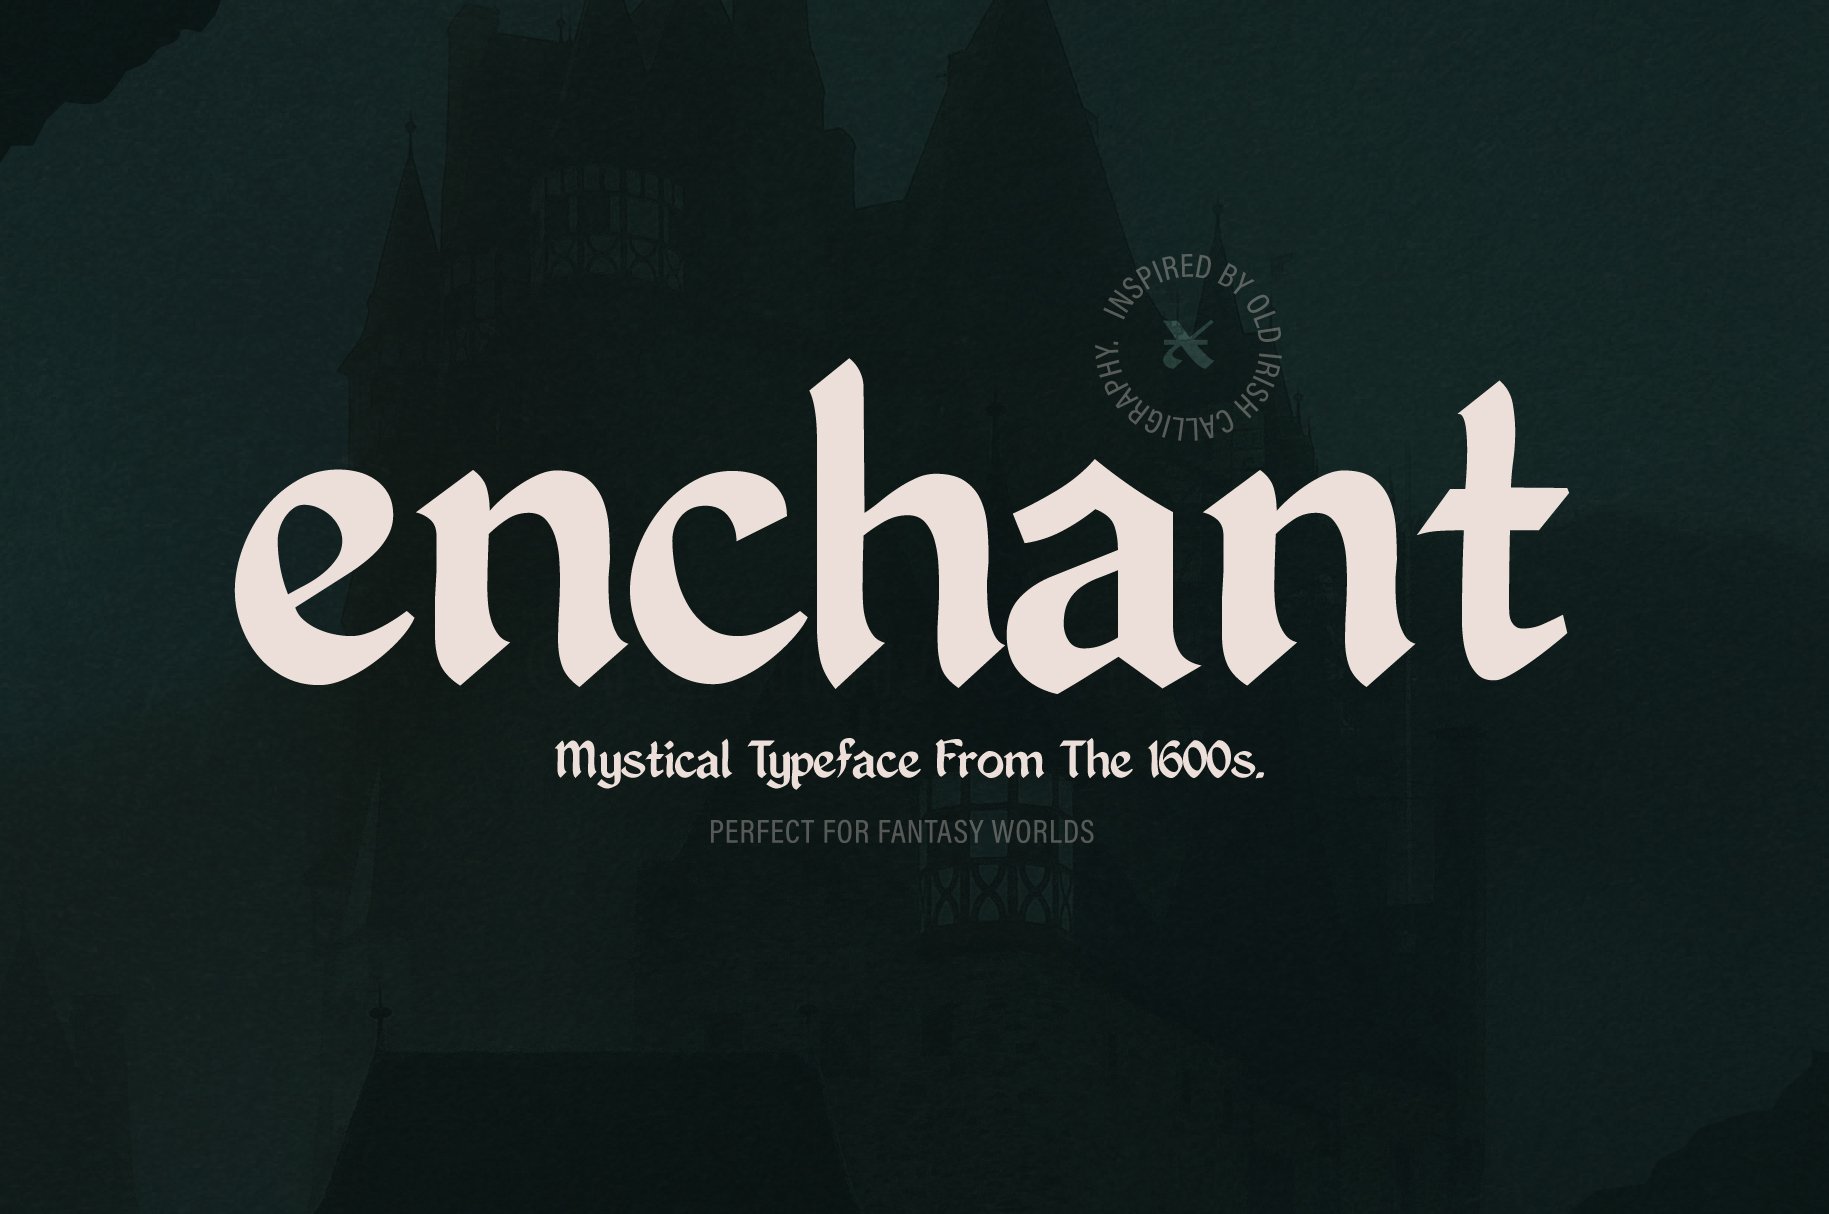 Enchant - Mystical 1600s Typefacecover image.